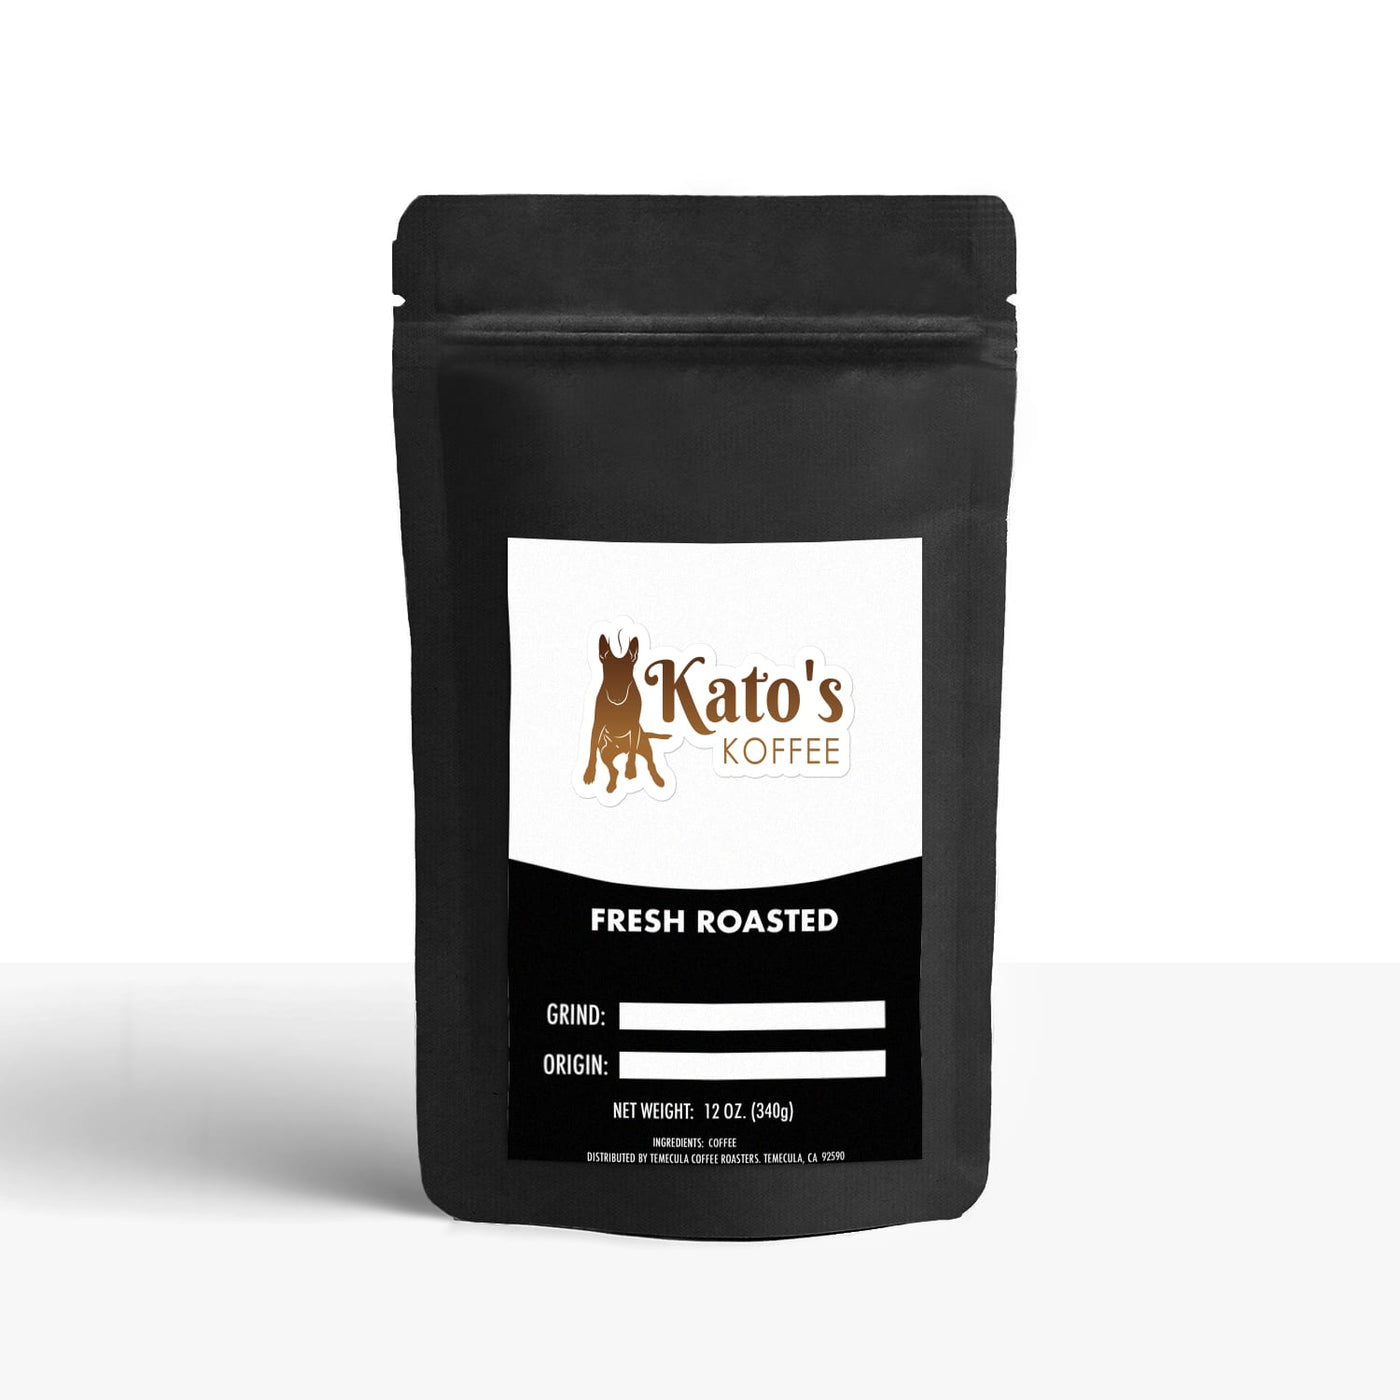 Holiday Blend - Kato's Koffee